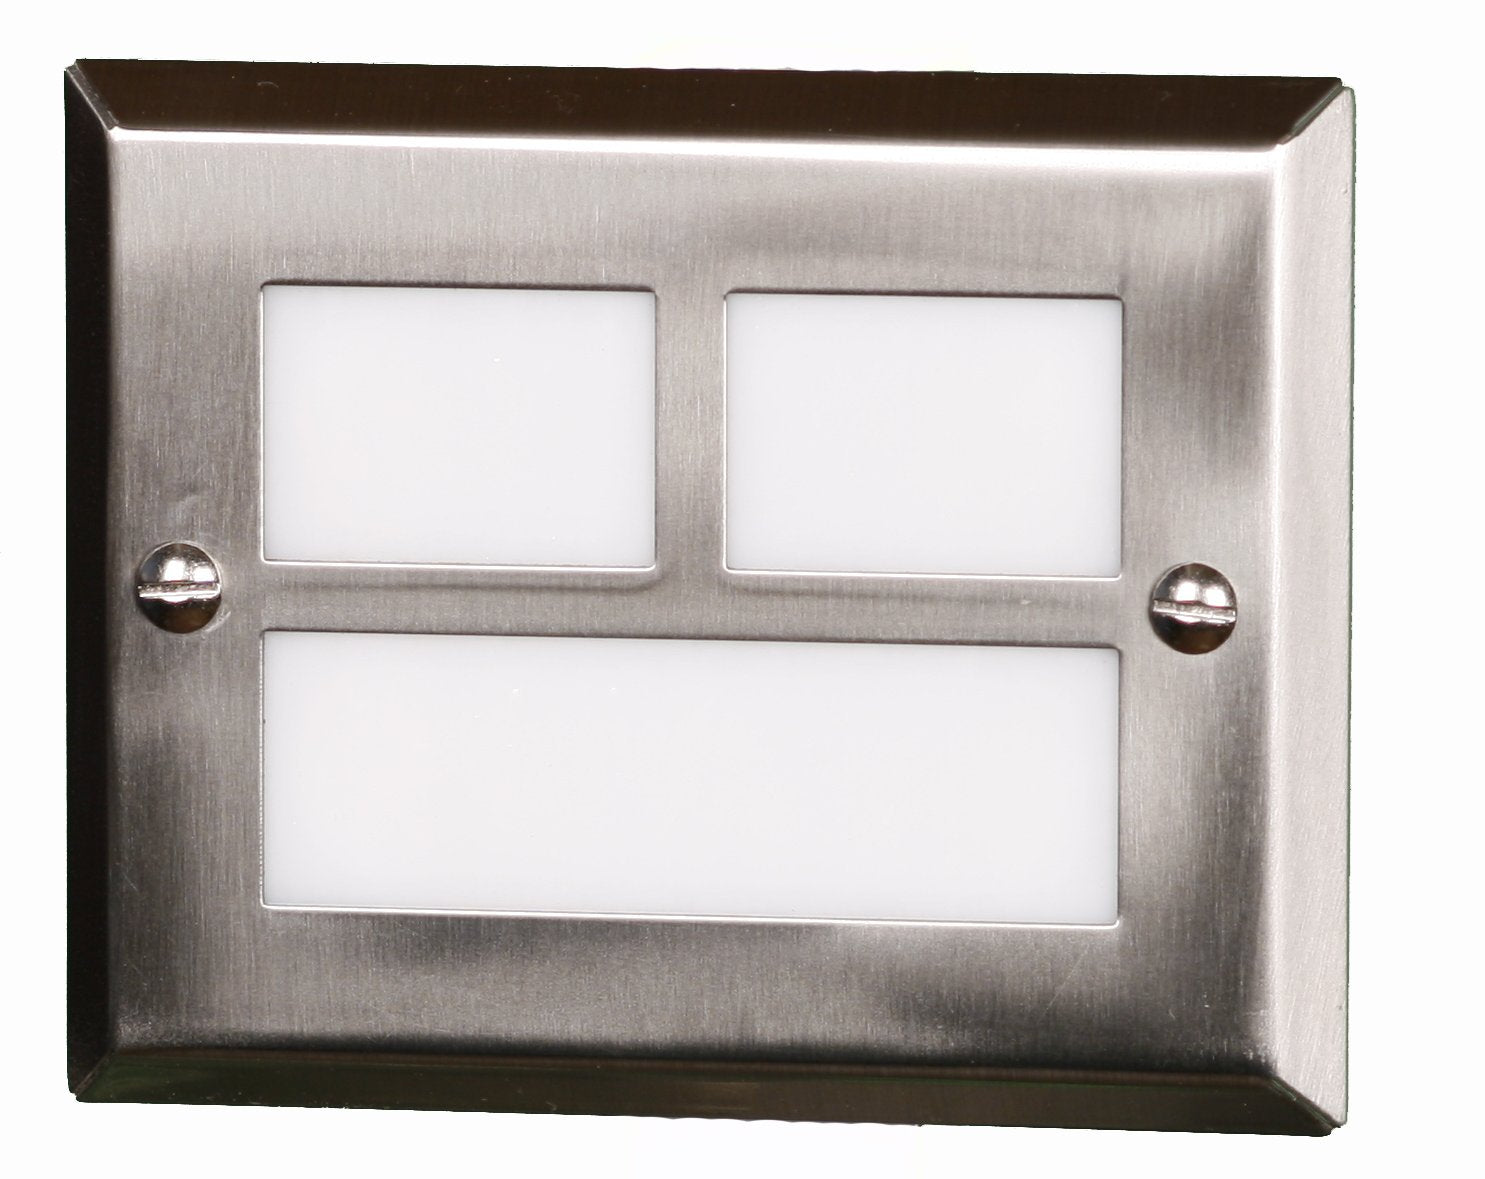 HighPoint Mt. Evans LED Step (Recessed) Light